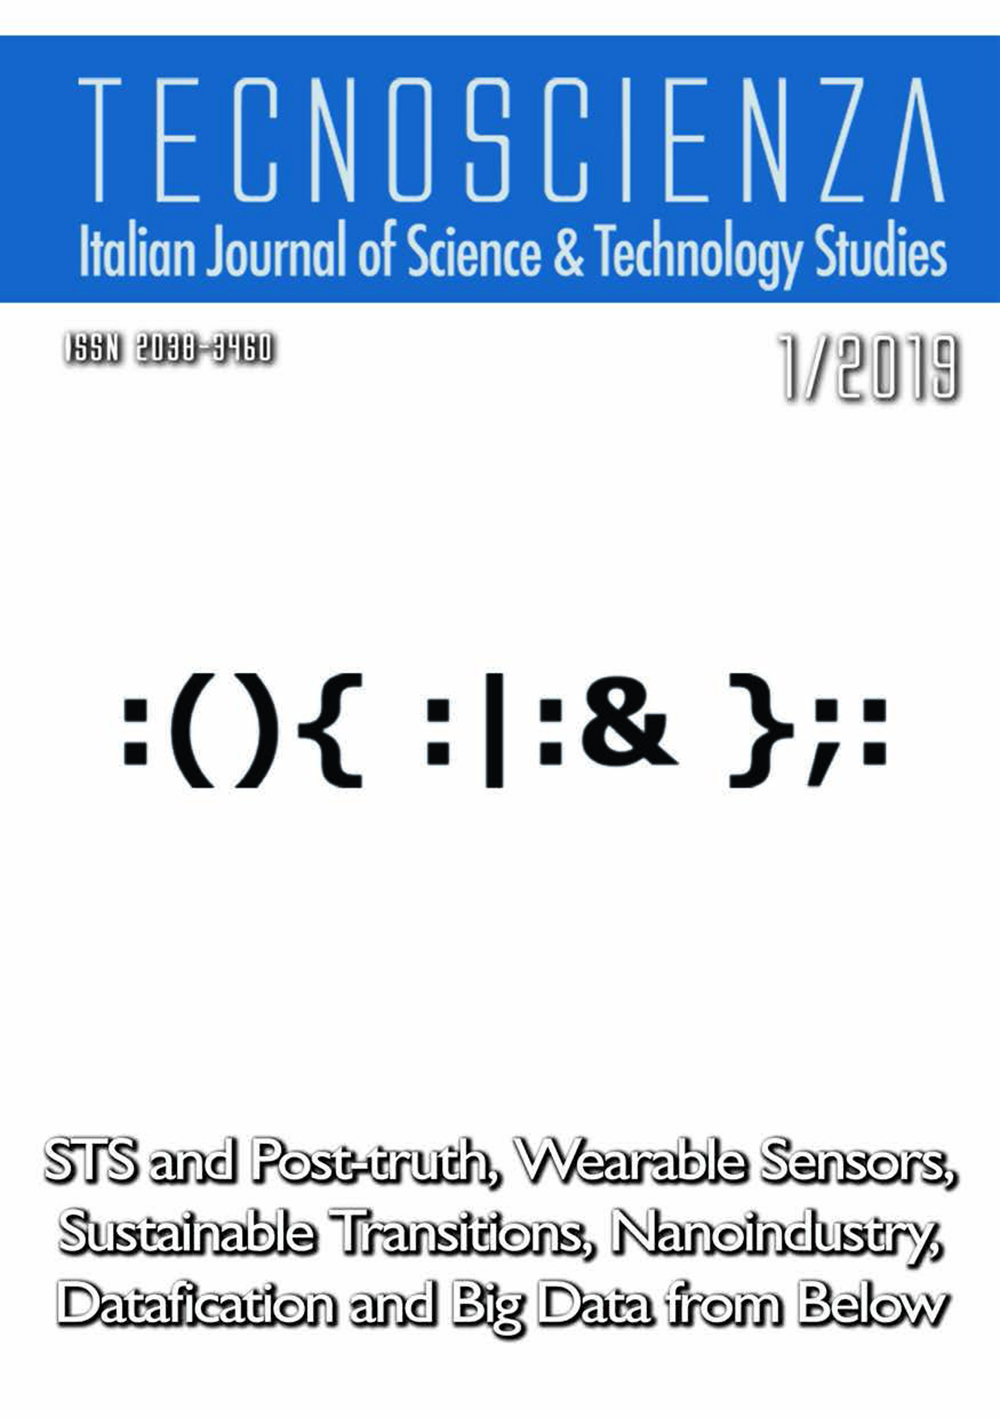 "ASCII Shell Forkbomb" by Jaromil. Cover of Tecnoscienza number 19 (1st Issue, Year 2019)